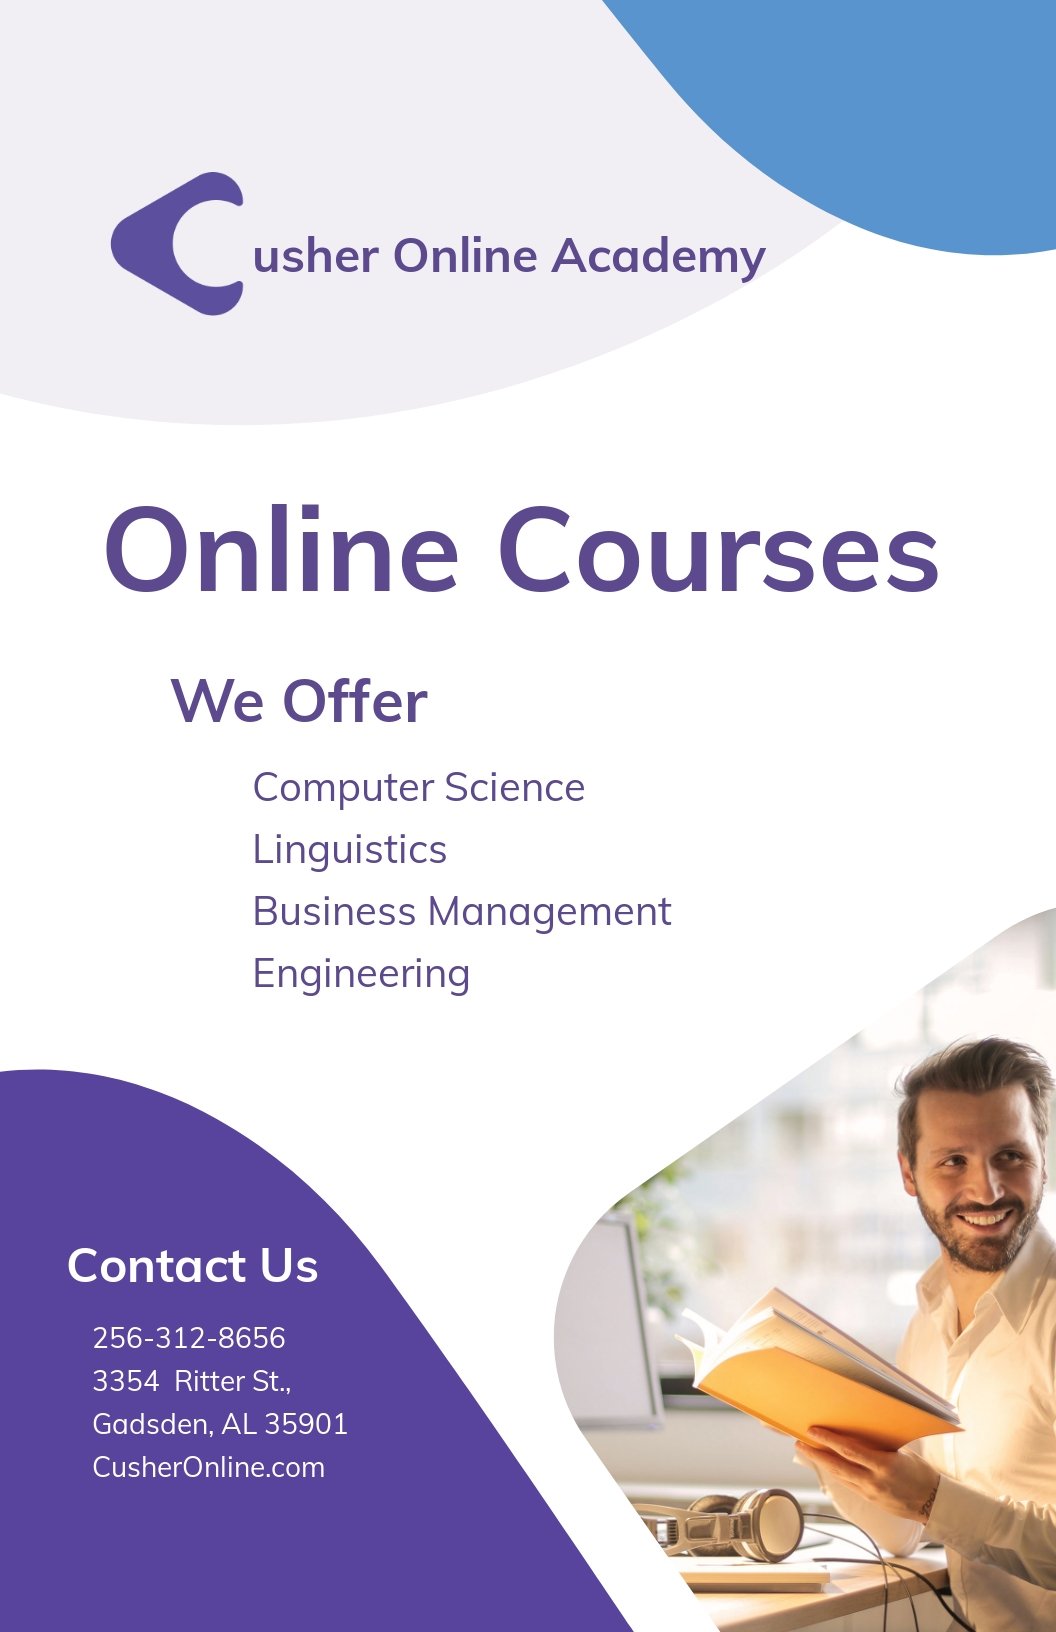 Online Courses Poster Template [Free JPG] - Illustrator, InDesign, Word